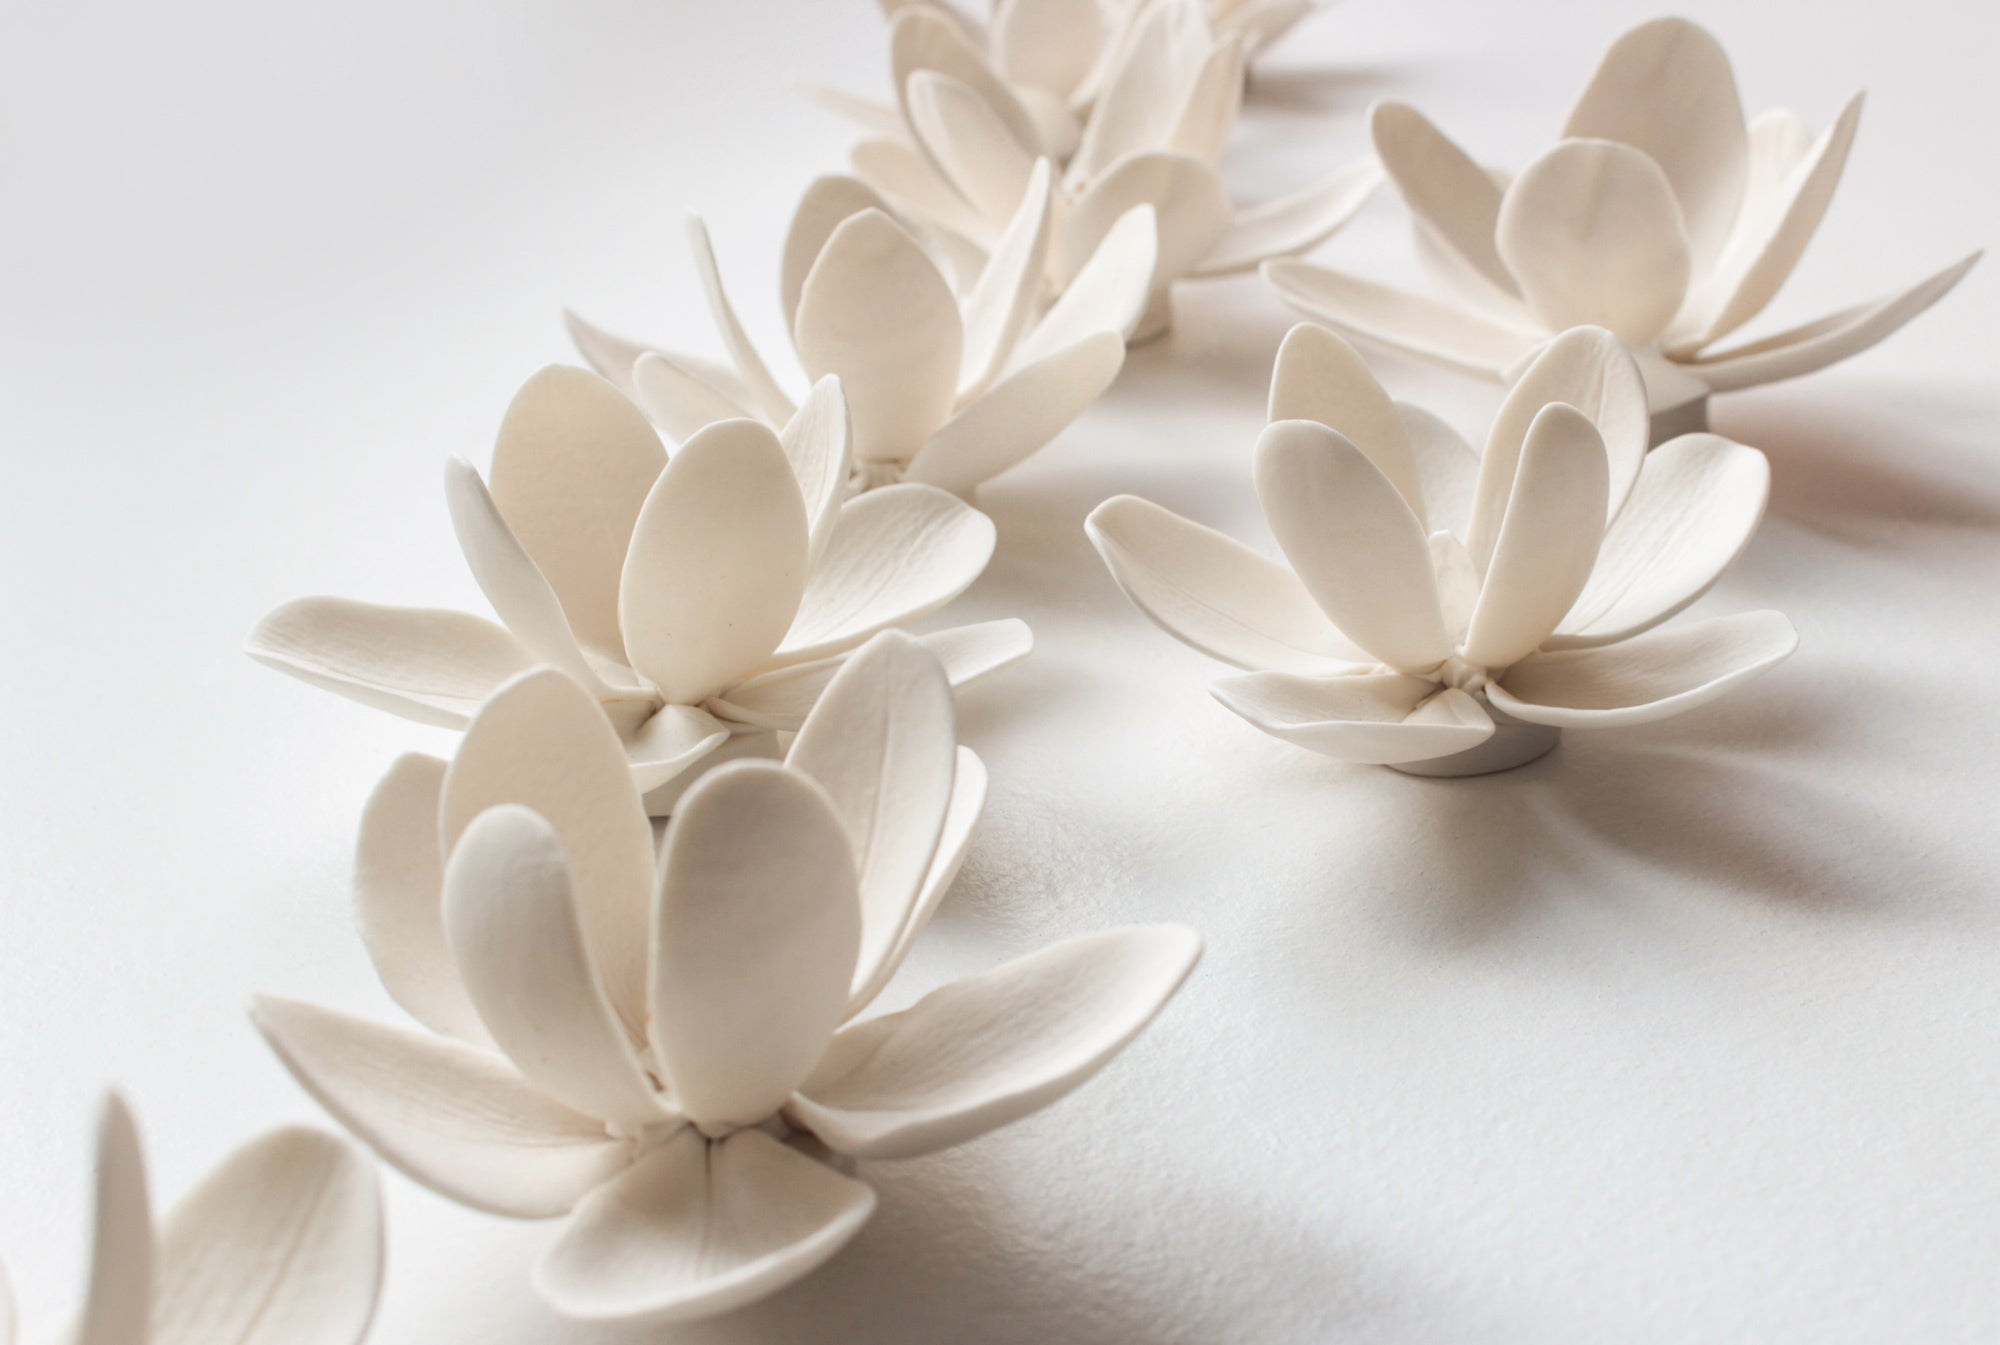 Wall Decor of Porcelain Magnolias - Handmade Porcelain Flowers for Interior and Event Decoration - Made in France by Alain Granell – Home and Wall Decoration